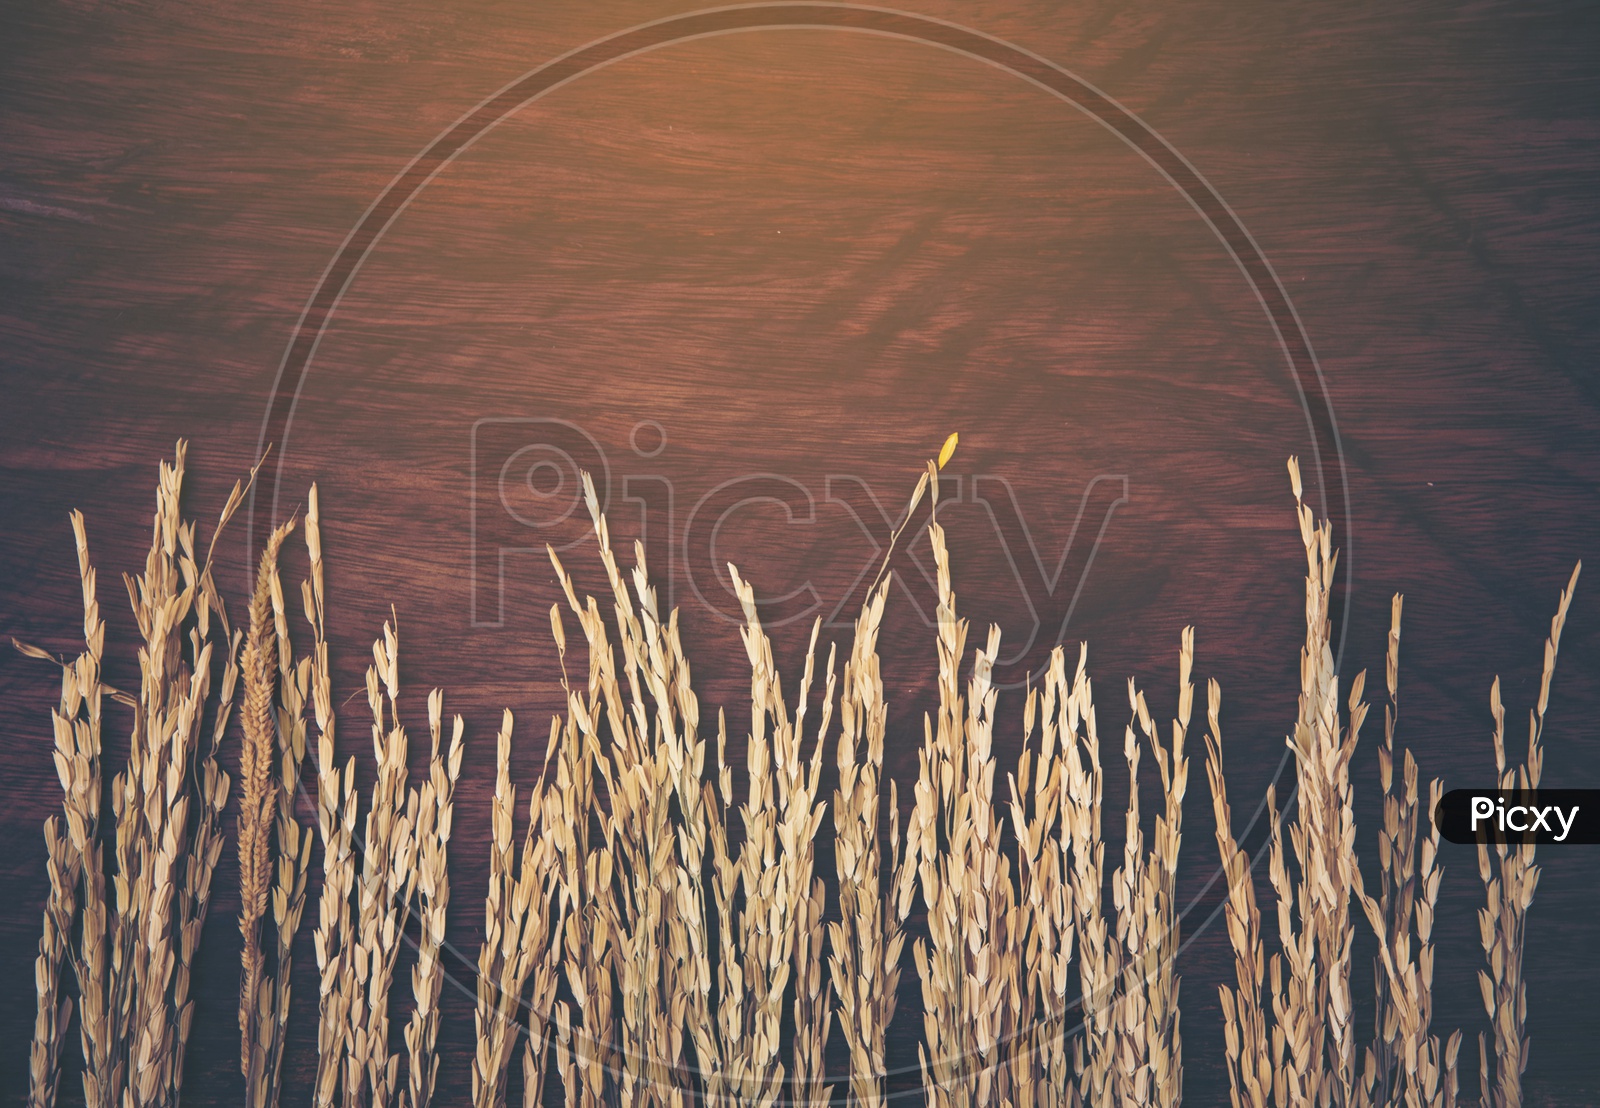 Dry grass frame on wood background with vintage filter effect